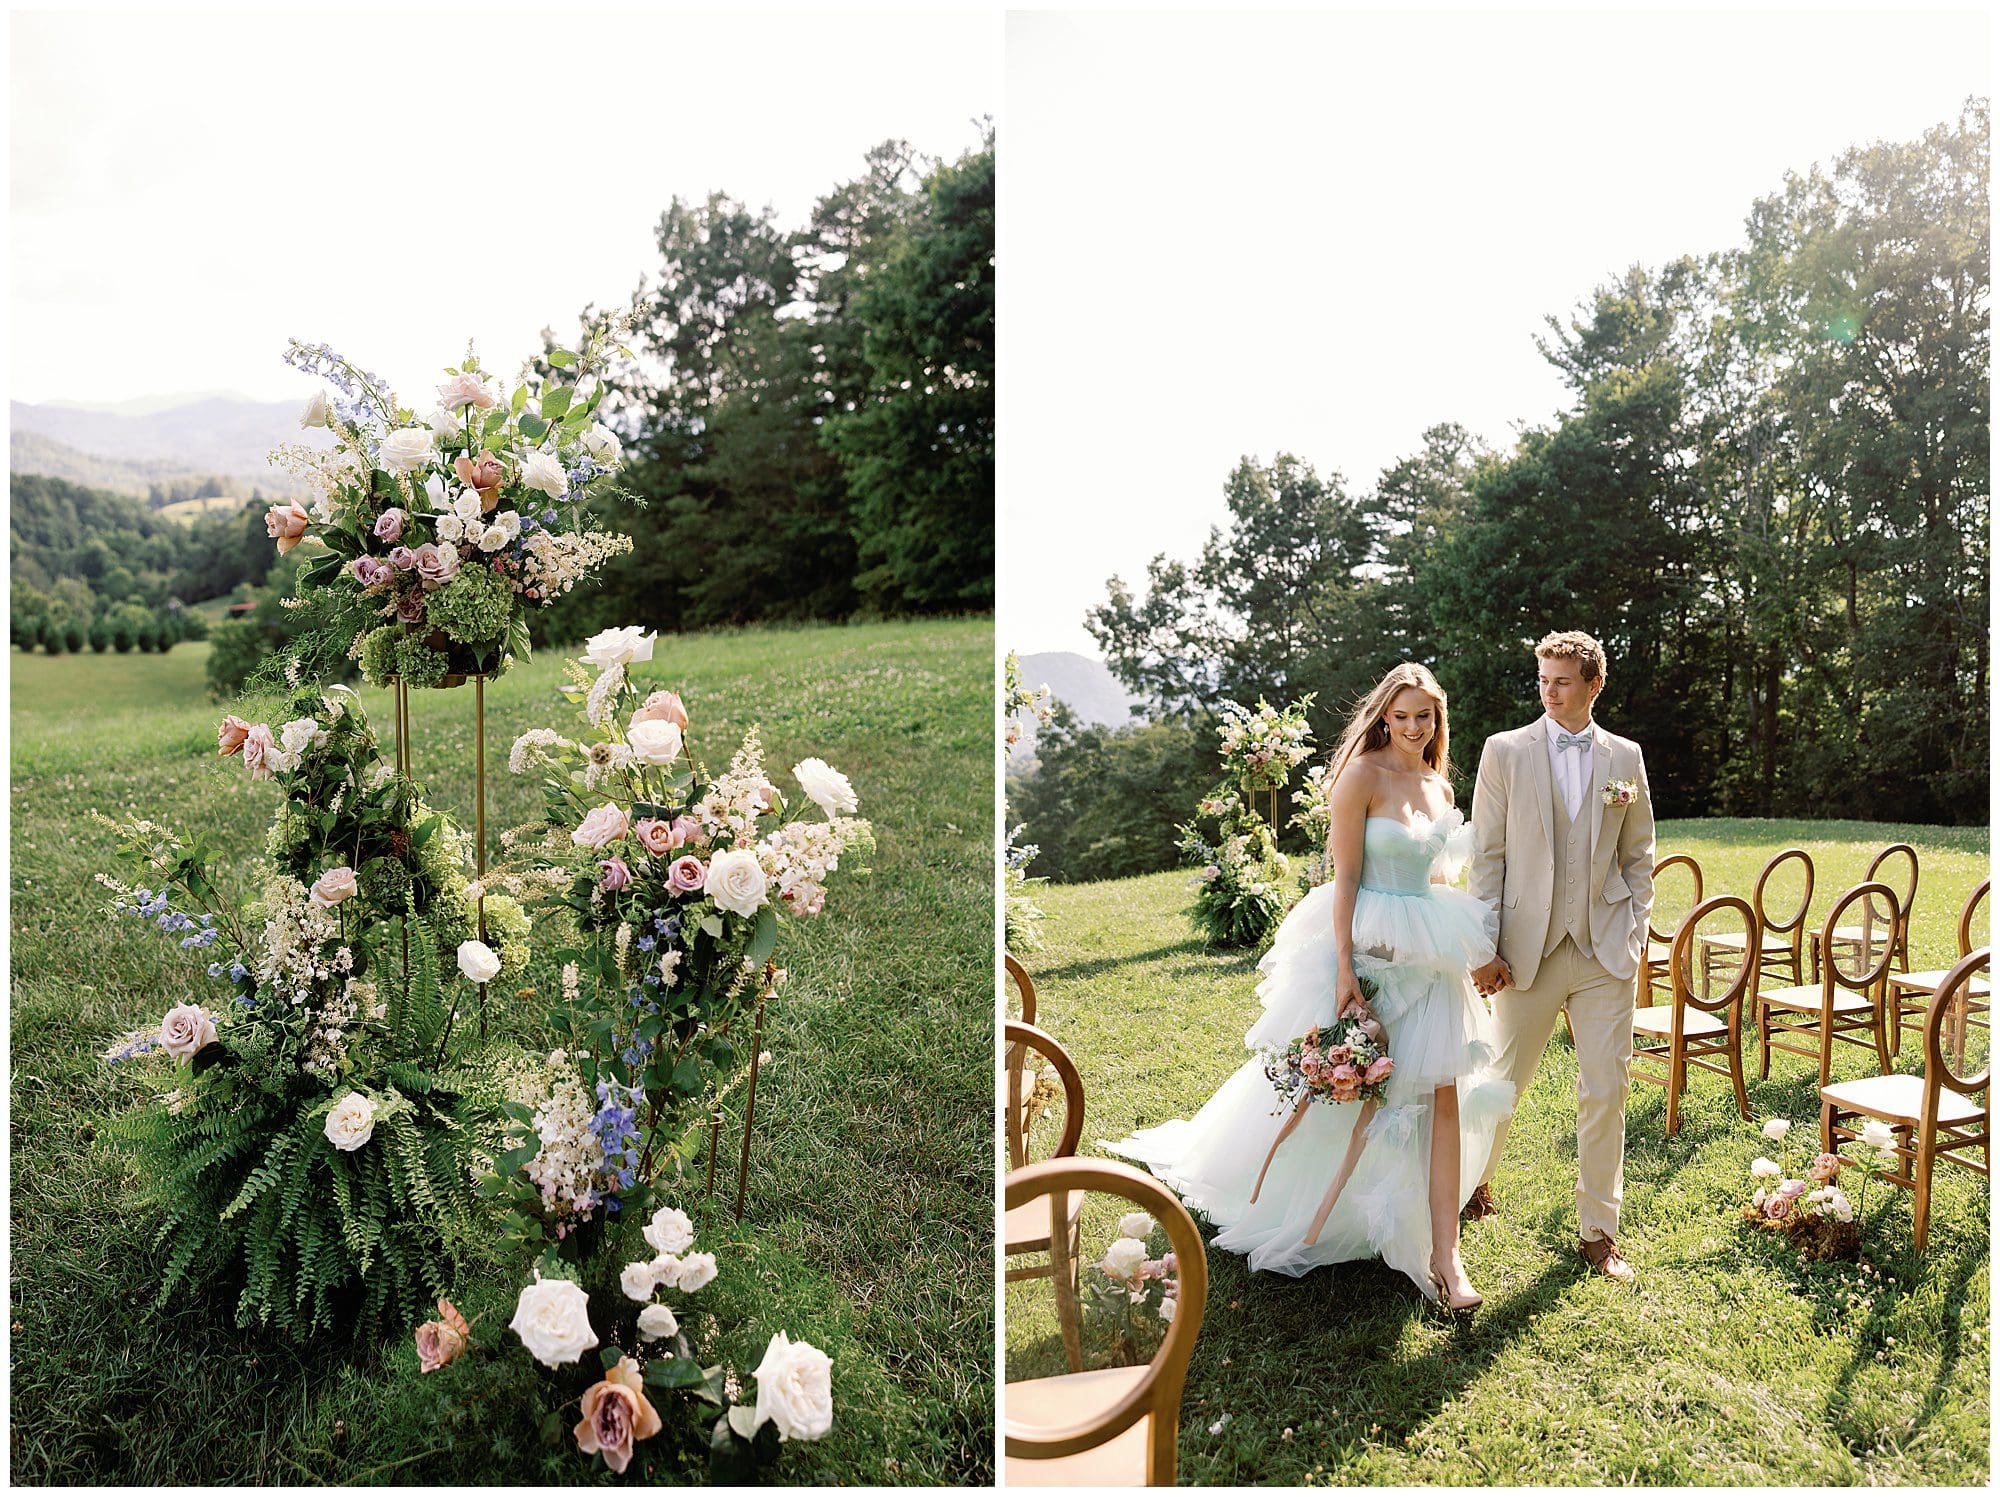 A Parisian-inspired bride and groom standing in front of chairs in a field at The Ridge.